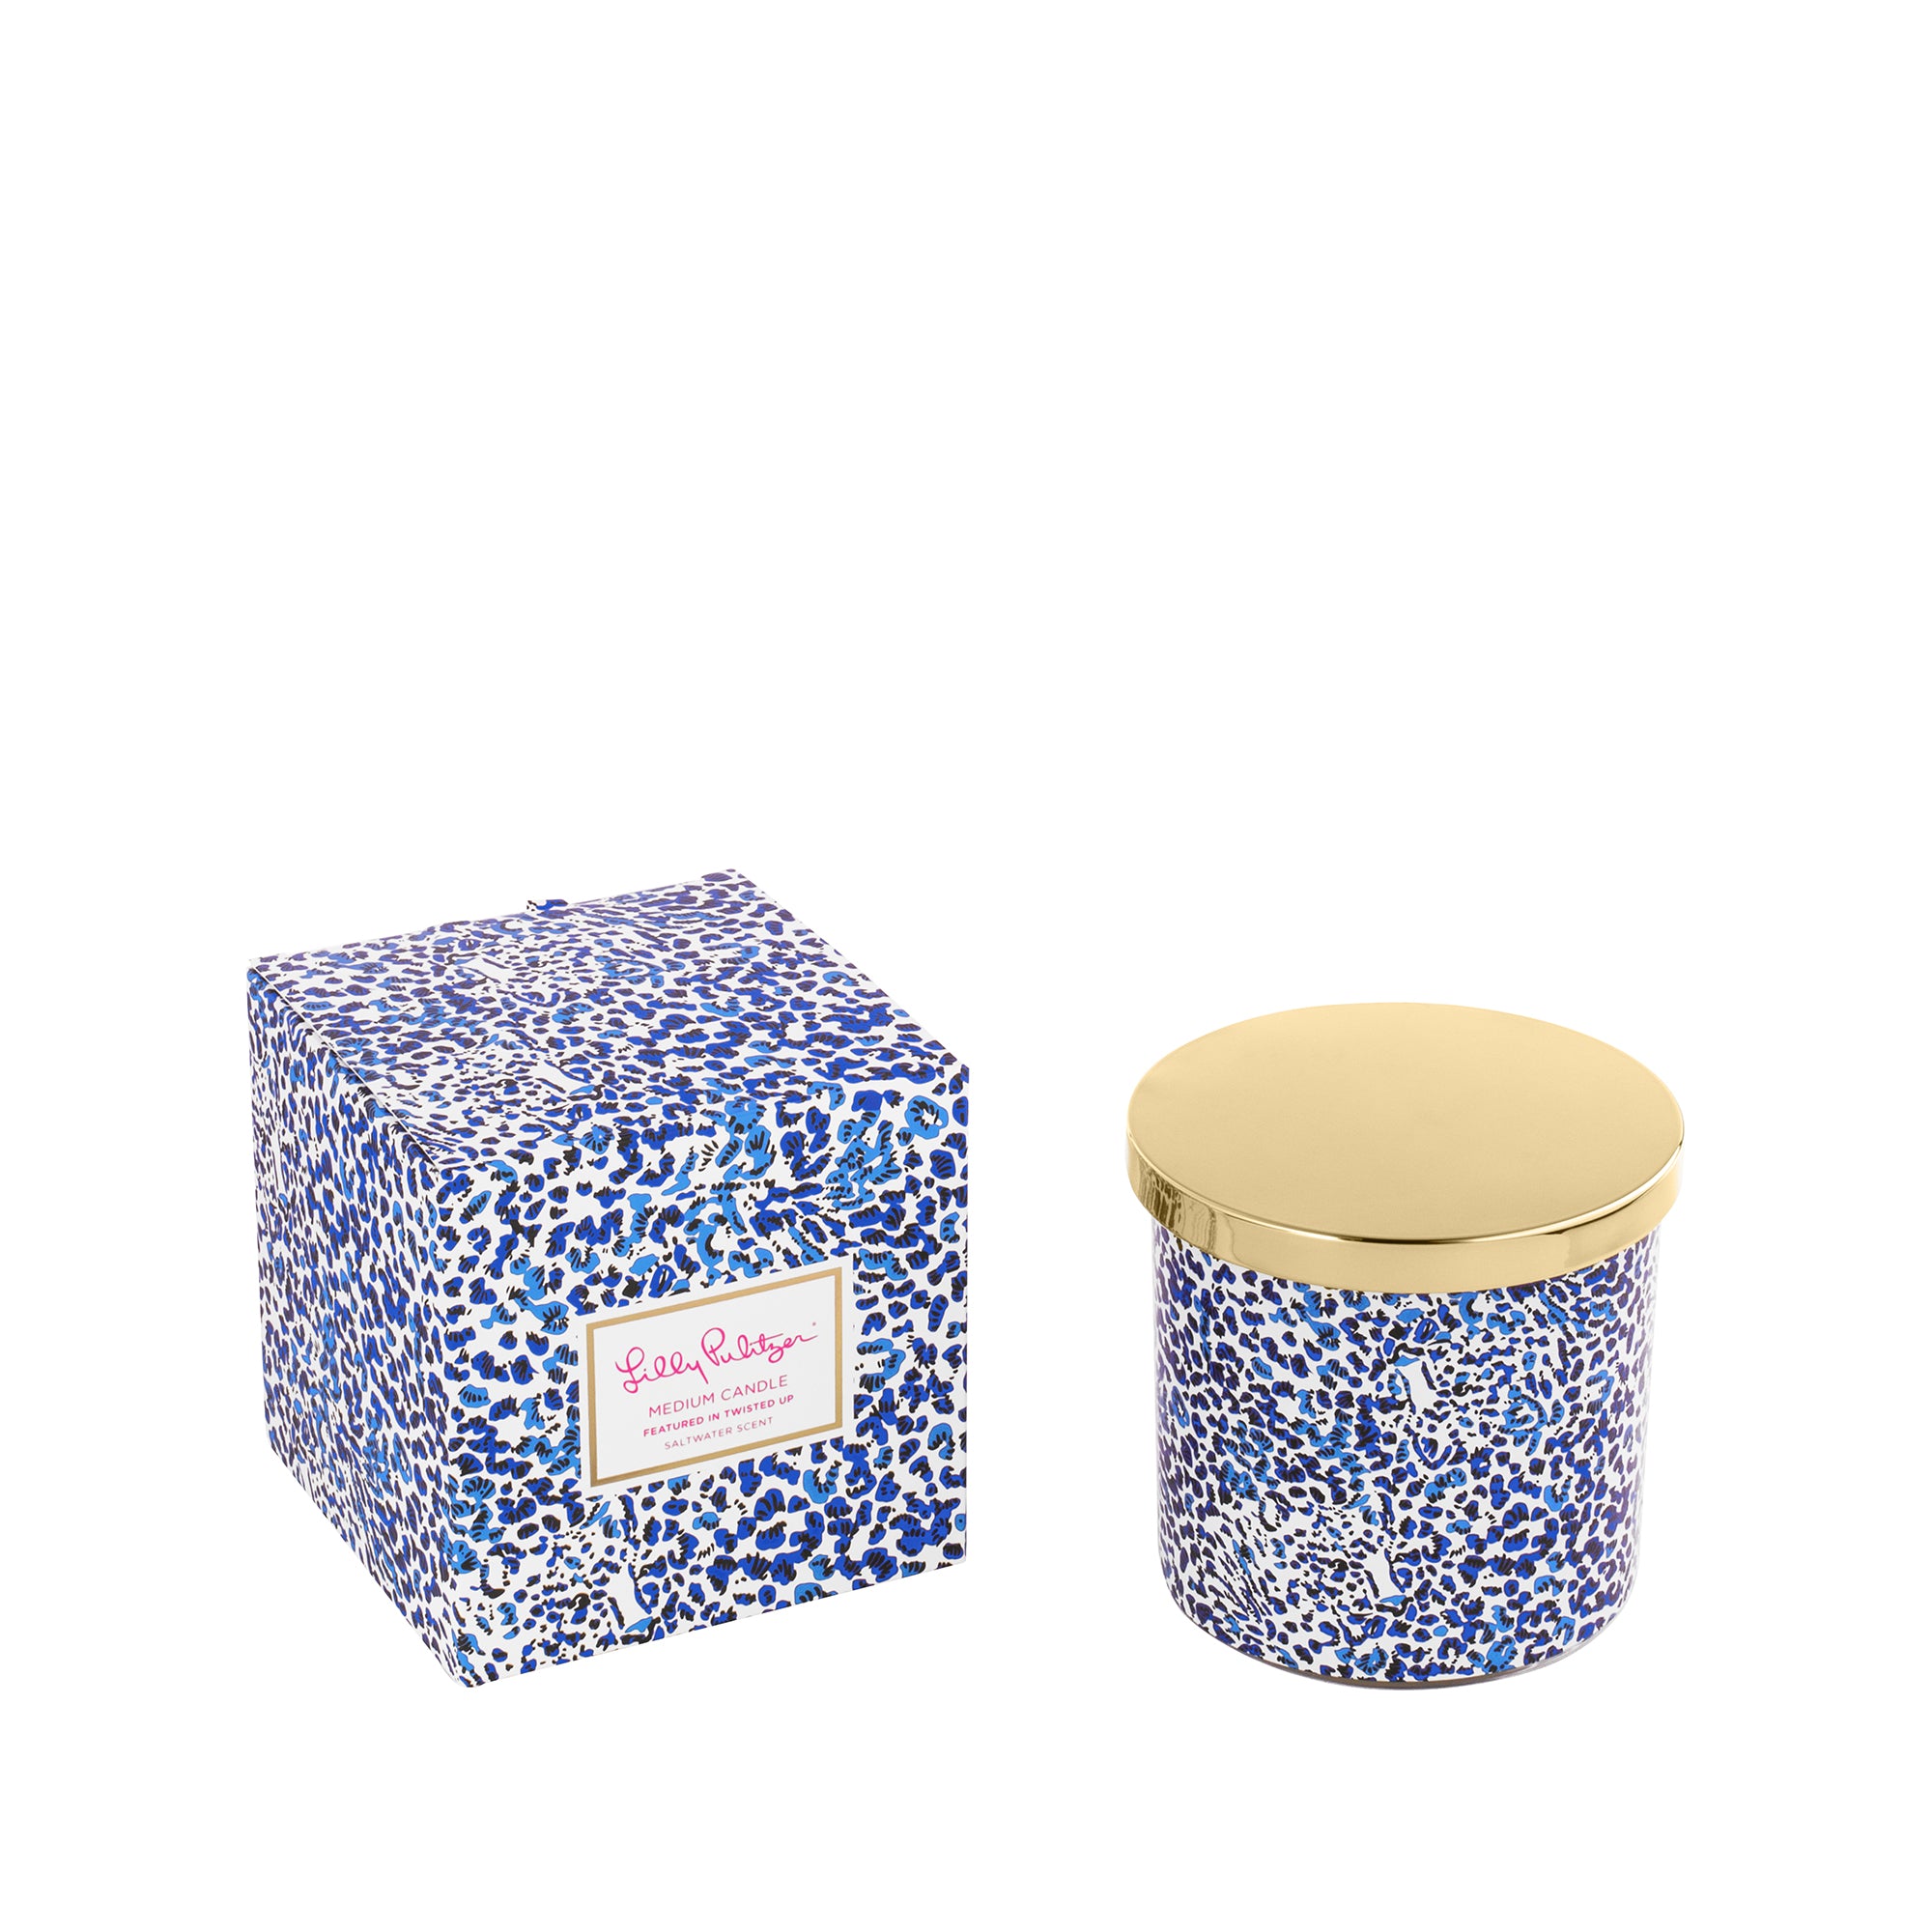 Medium Candle by Lilly Pulitzer - Twisted Up